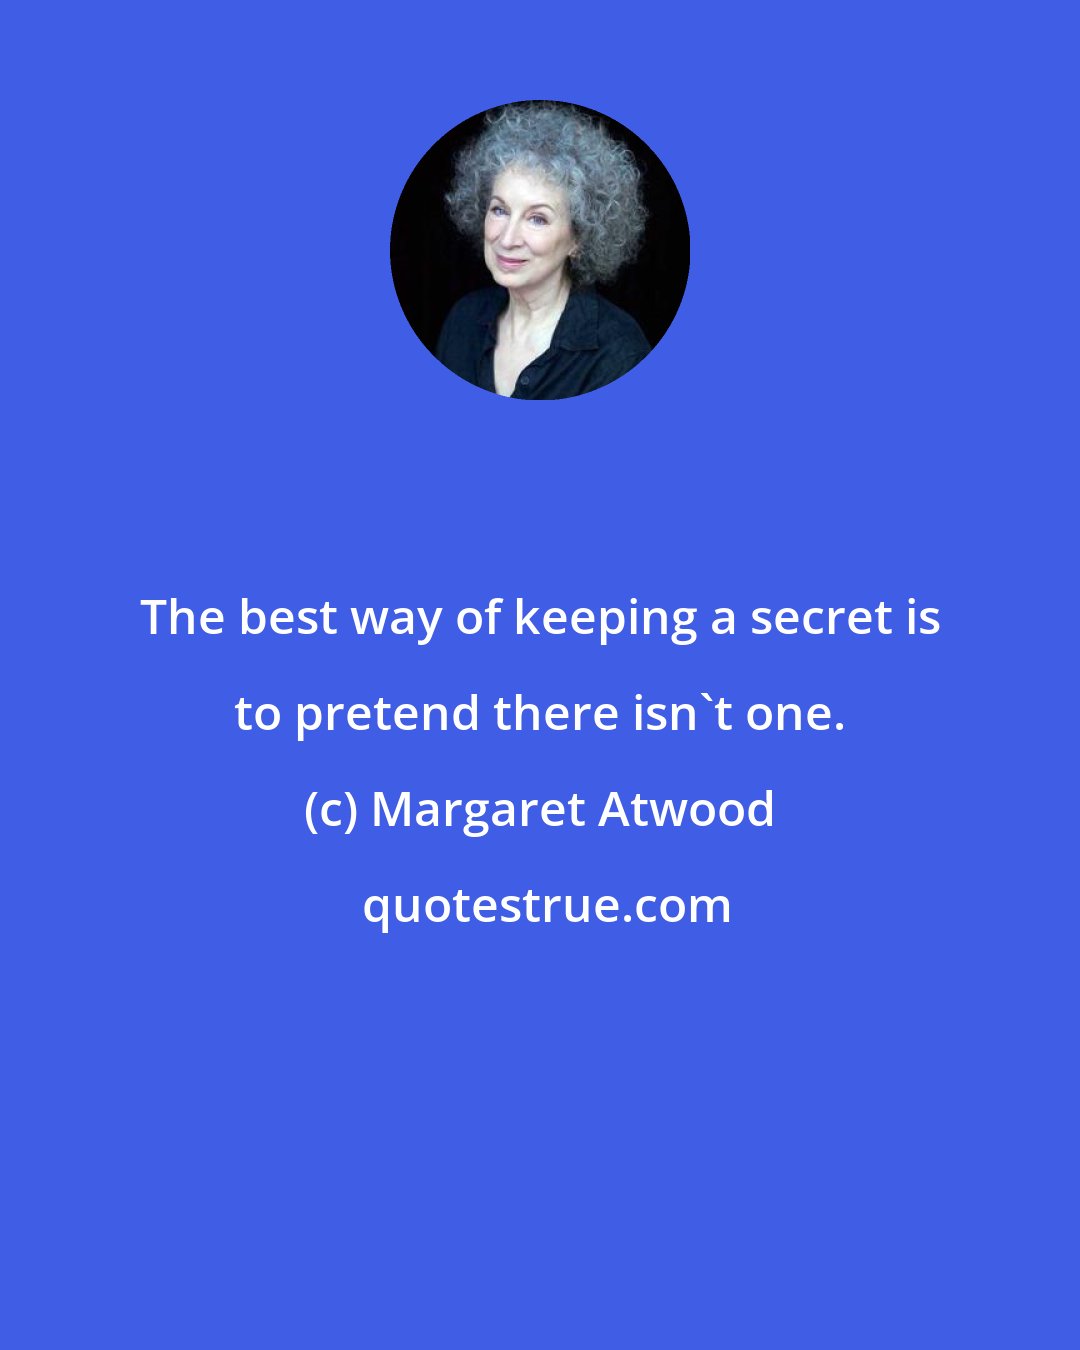 Margaret Atwood: The best way of keeping a secret is to pretend there isn't one.